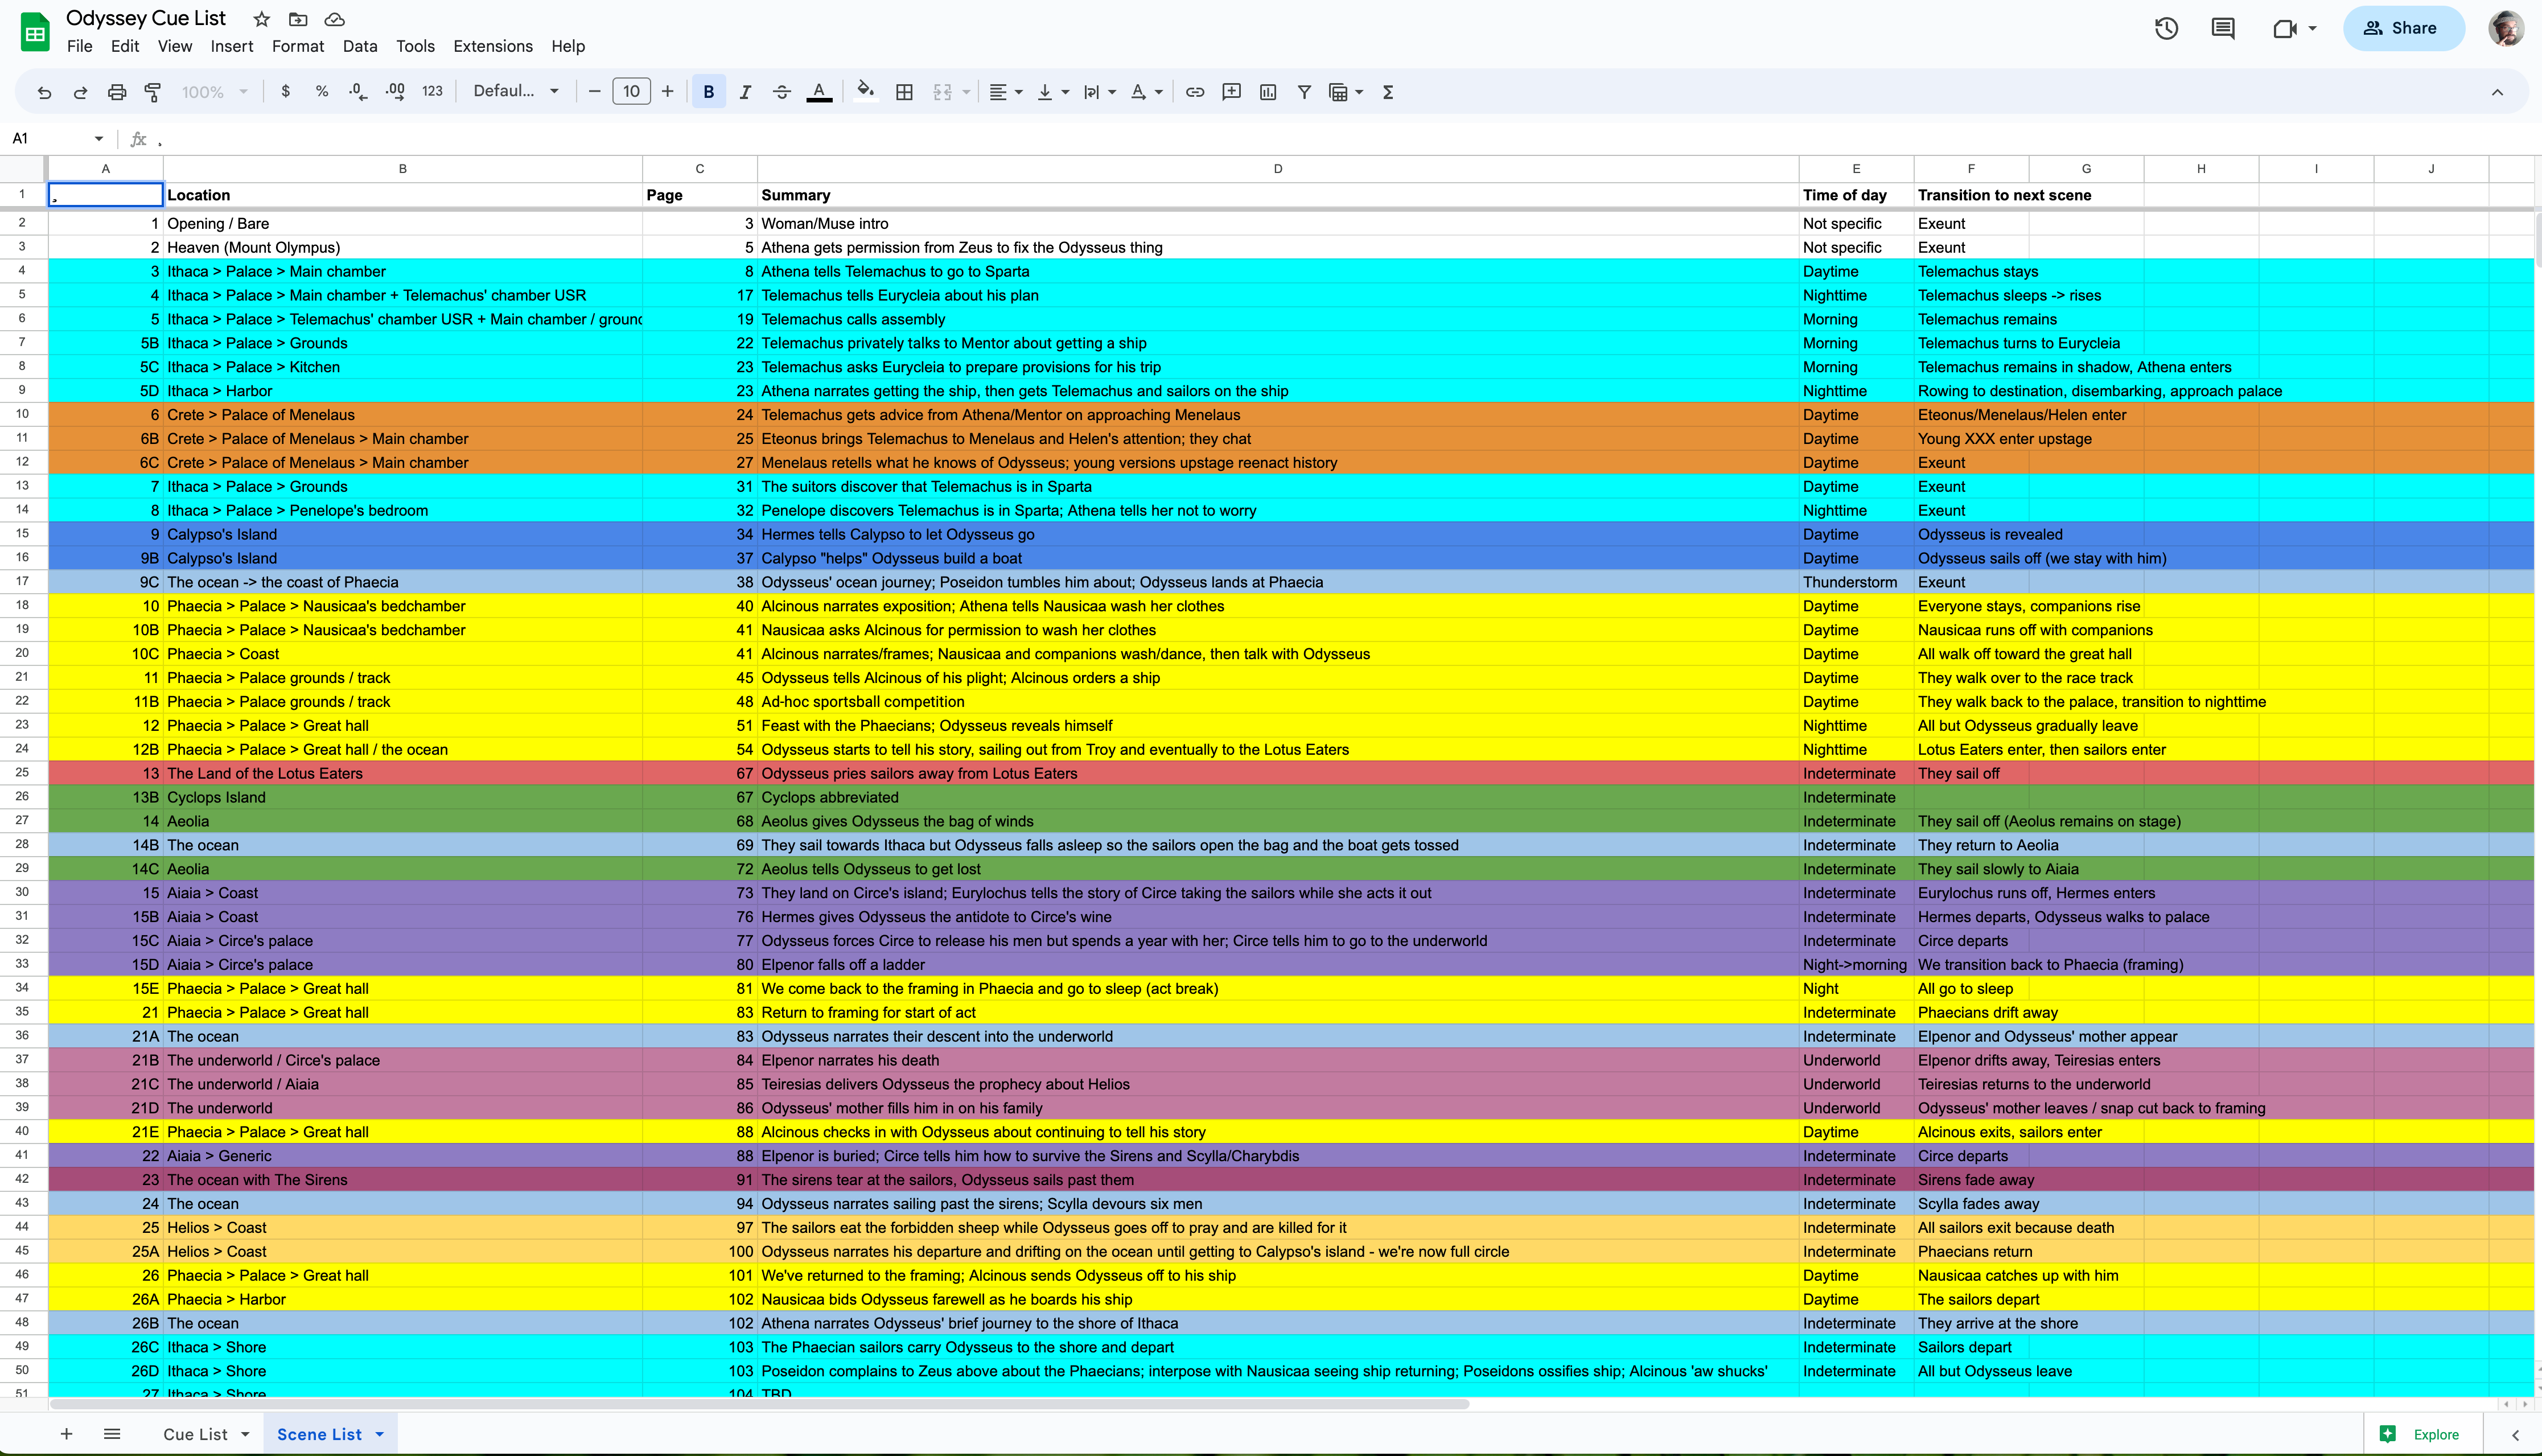 Color-coded scene list